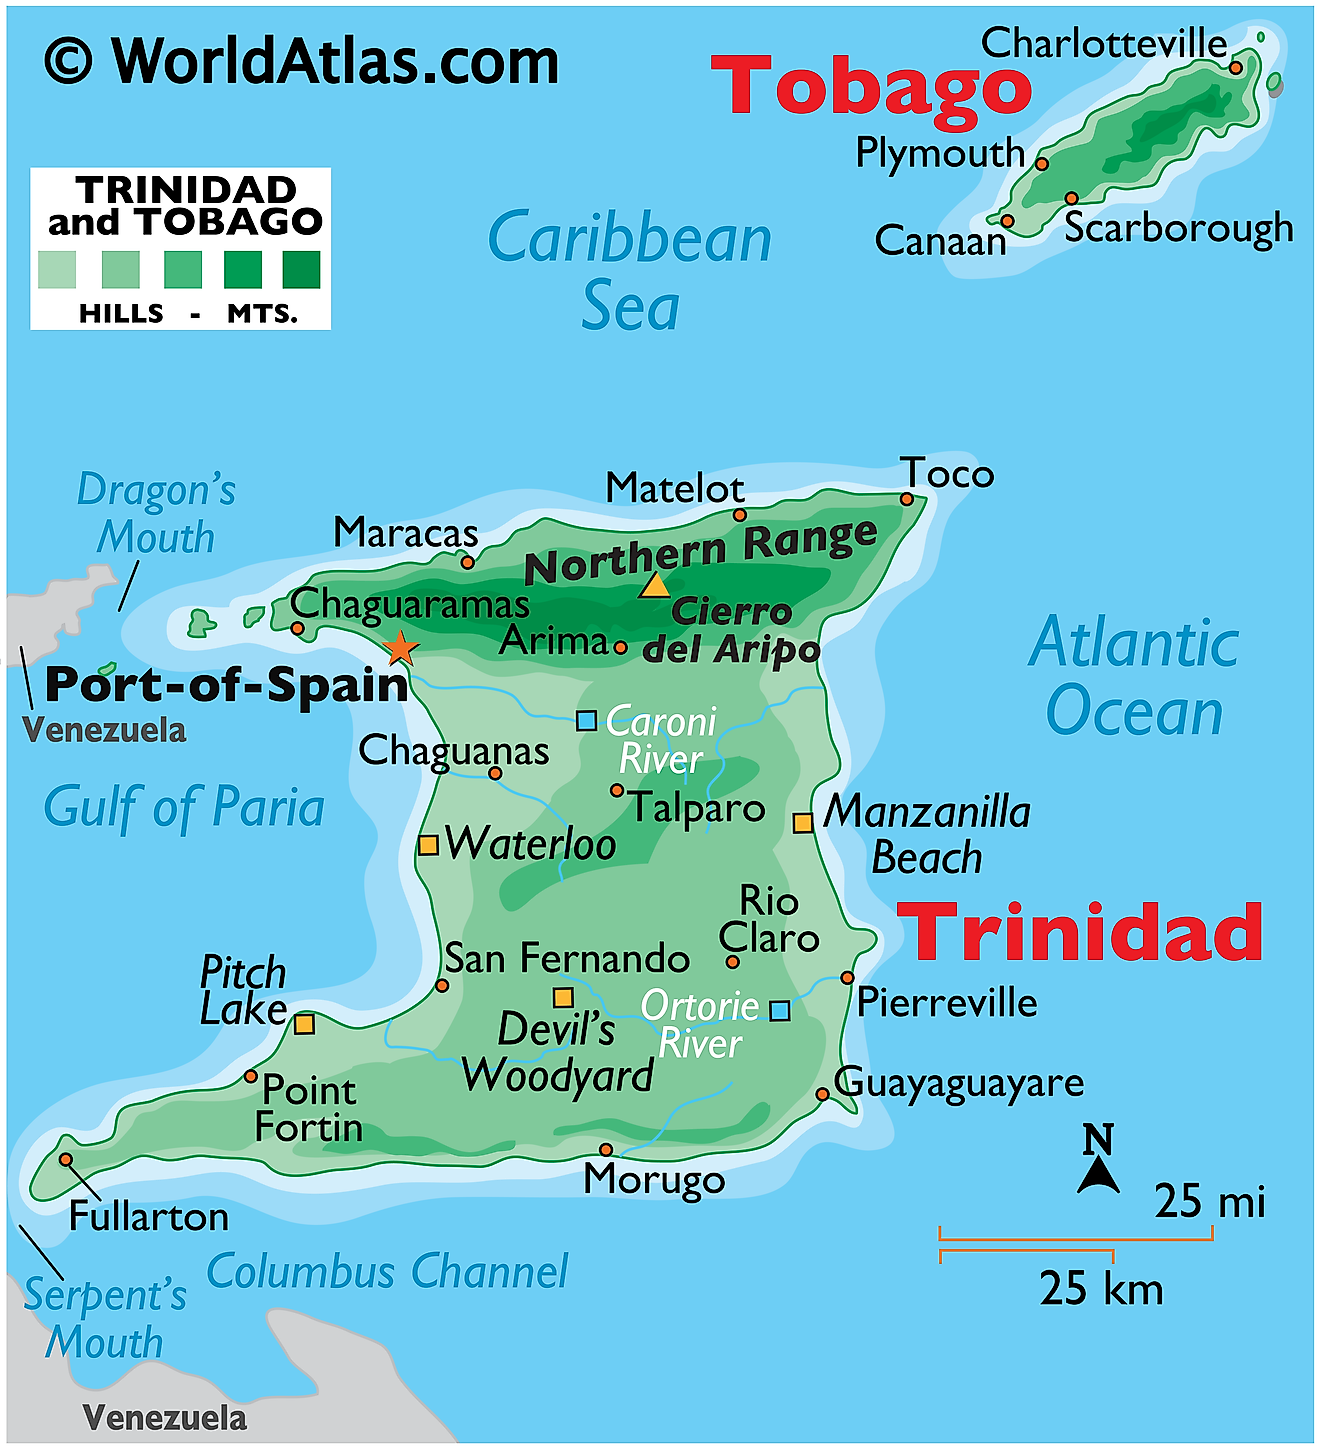 Physical Map of Trinidad and Tobago showing relief, two main islands, mountains, the famous Pitch Lake, rivers, etc.